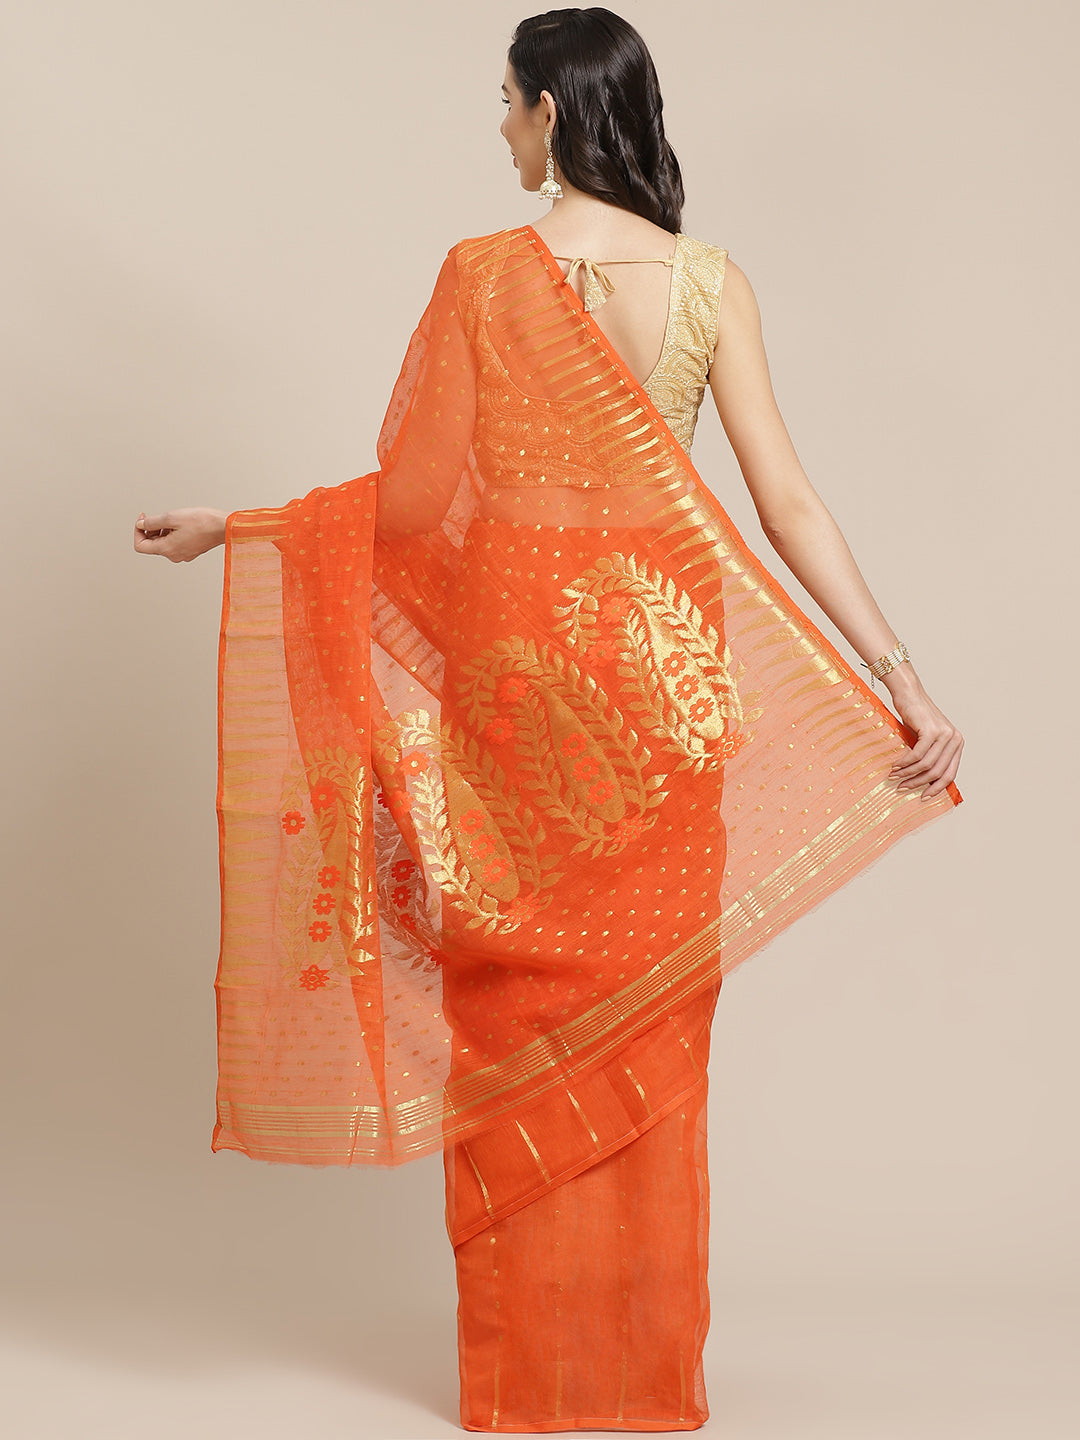 Orange and Gold, Kalakari India Jamdani Silk Cotton Woven Design Saree without blouse CHBHSA0016-Saree-Kalakari India-CHBHSA0016-Bengal, Geographical Indication, Hand Crafted, Hand Painted, Heritage Prints, Jamdani, Natural Dyes, Red, Sarees, Silk Blended, Sustainable Fabrics, Woven, Yellow-[Linen,Ethnic,wear,Fashionista,Handloom,Handicraft,Indigo,blockprint,block,print,Cotton,Chanderi,Blue, latest,classy,party,bollywood,trendy,summer,style,traditional,formal,elegant,unique,style,hand,block,prin